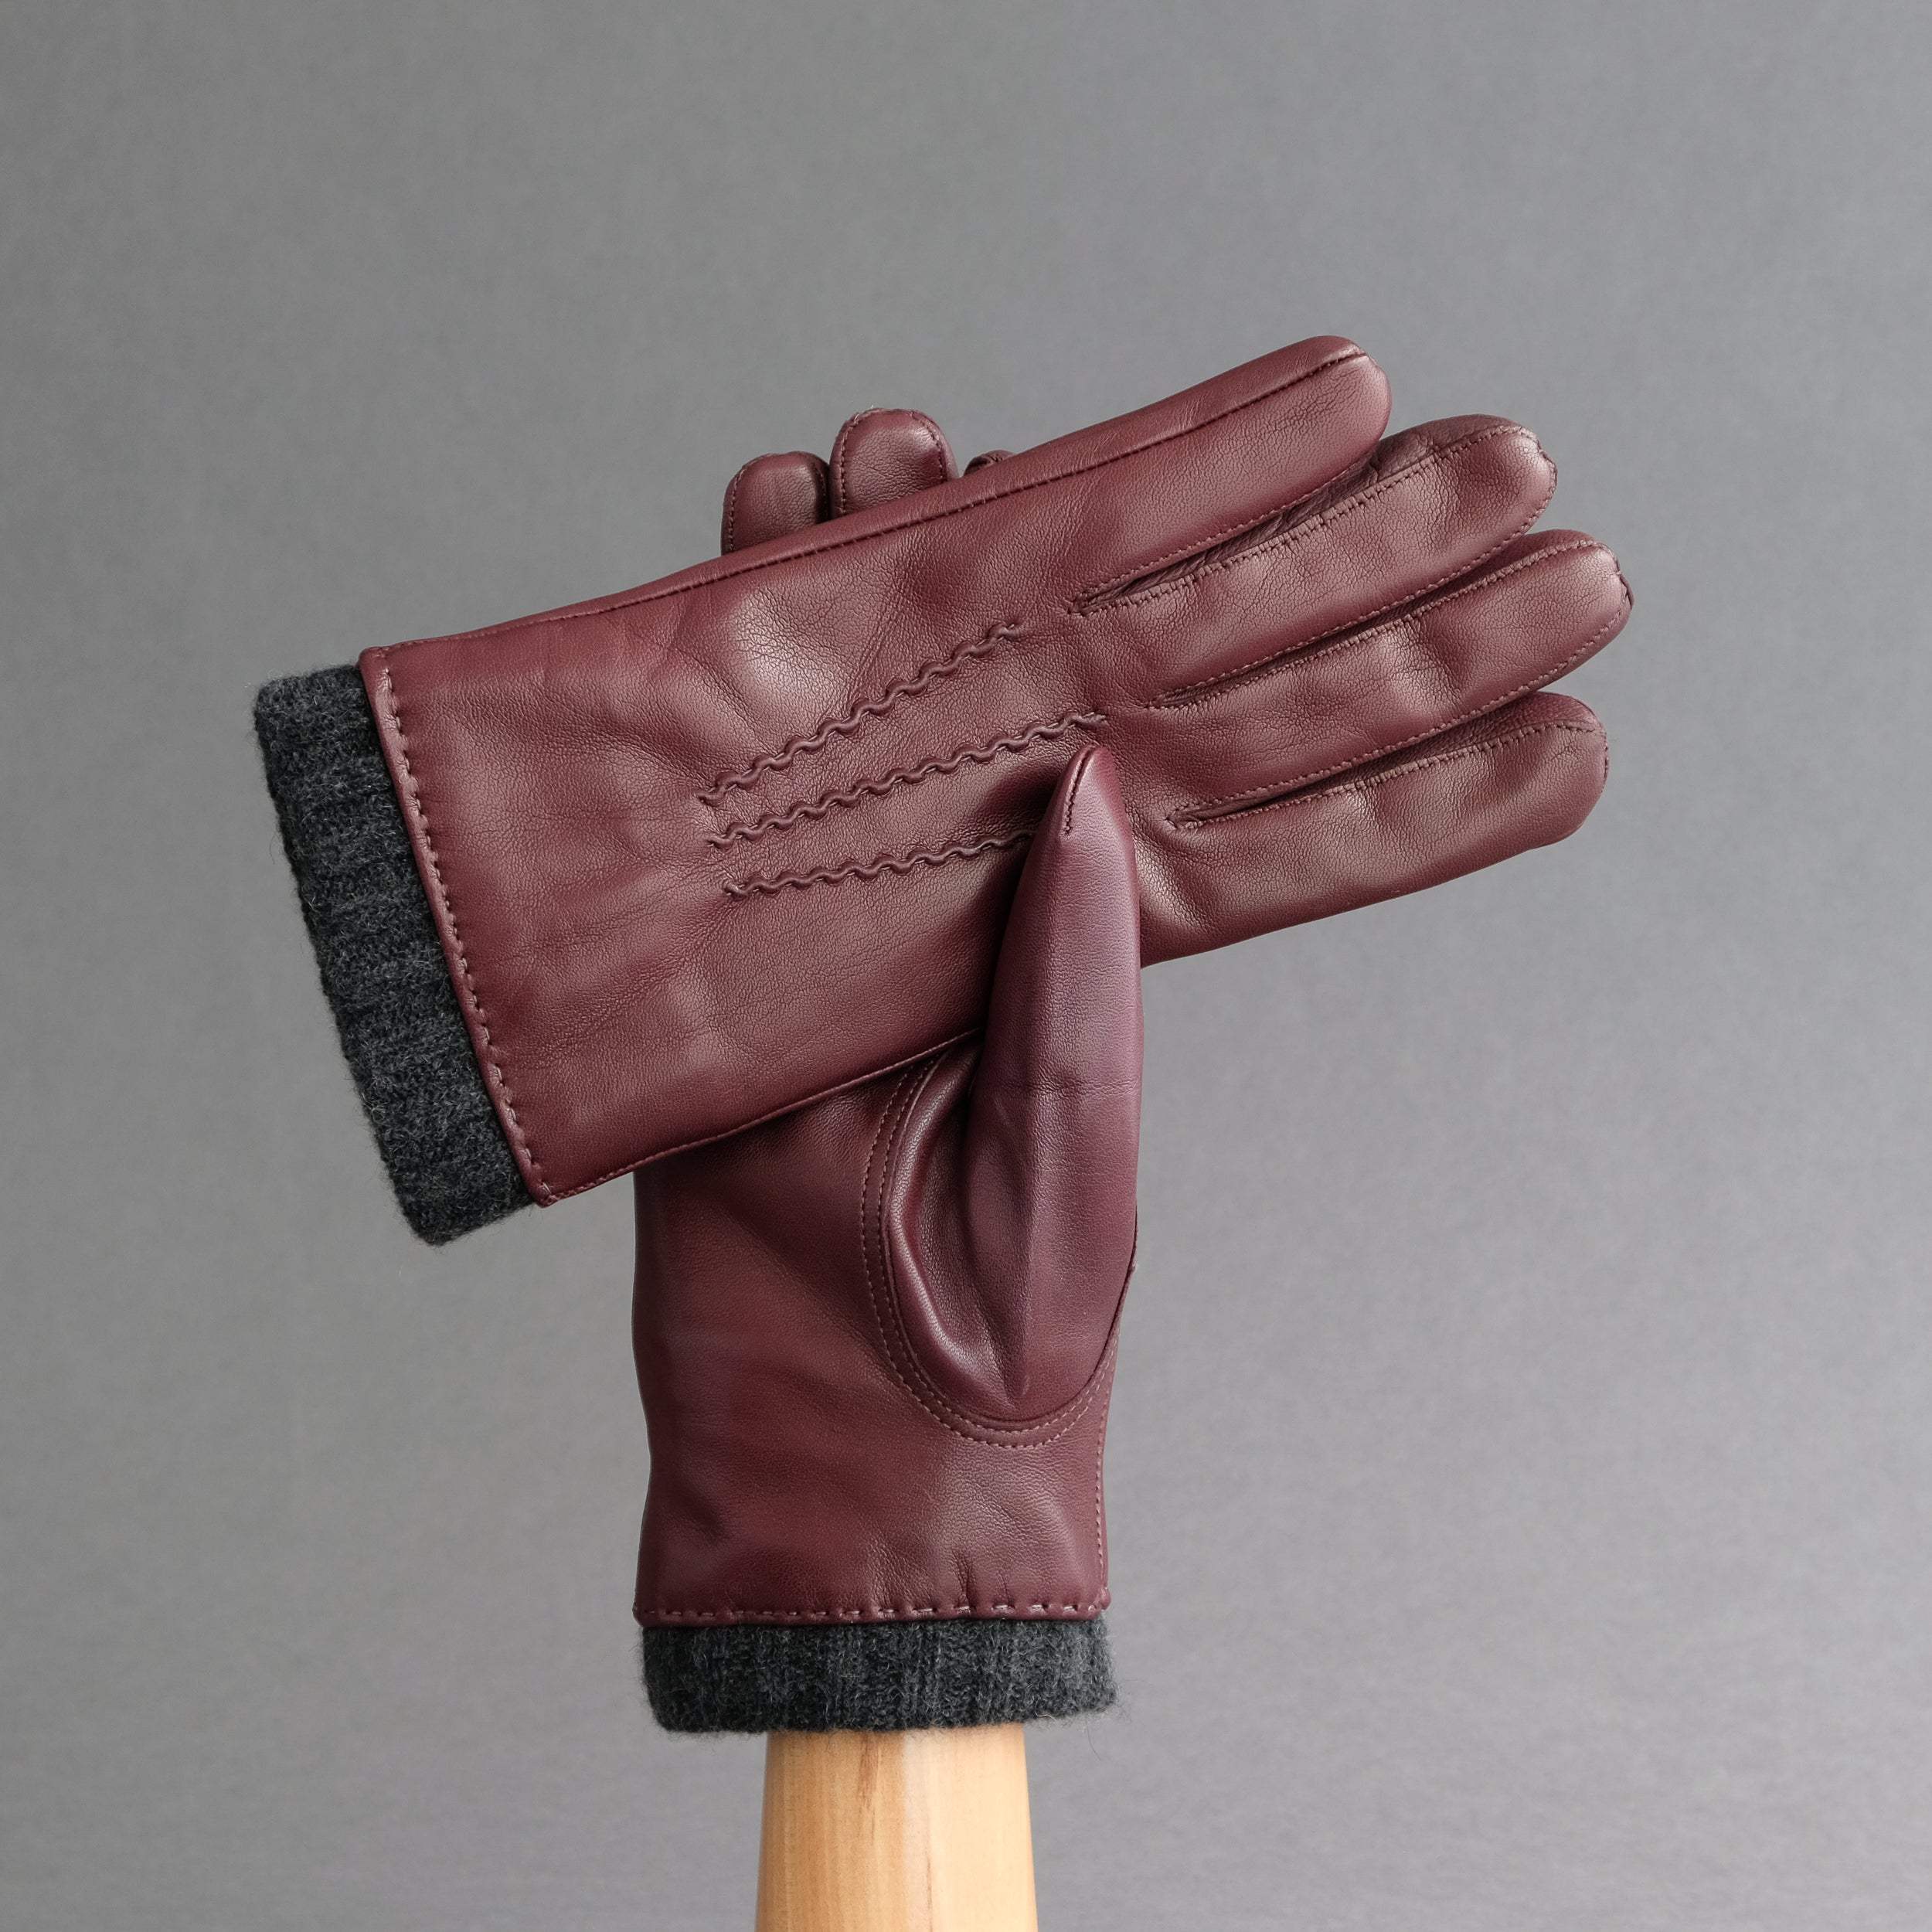 Gentlemen's Gloves from Bordeaux Hair Sheep Nappa Lined With Cashmere - TR Handschuhe Wien - Thomas Riemer Handmade Gloves